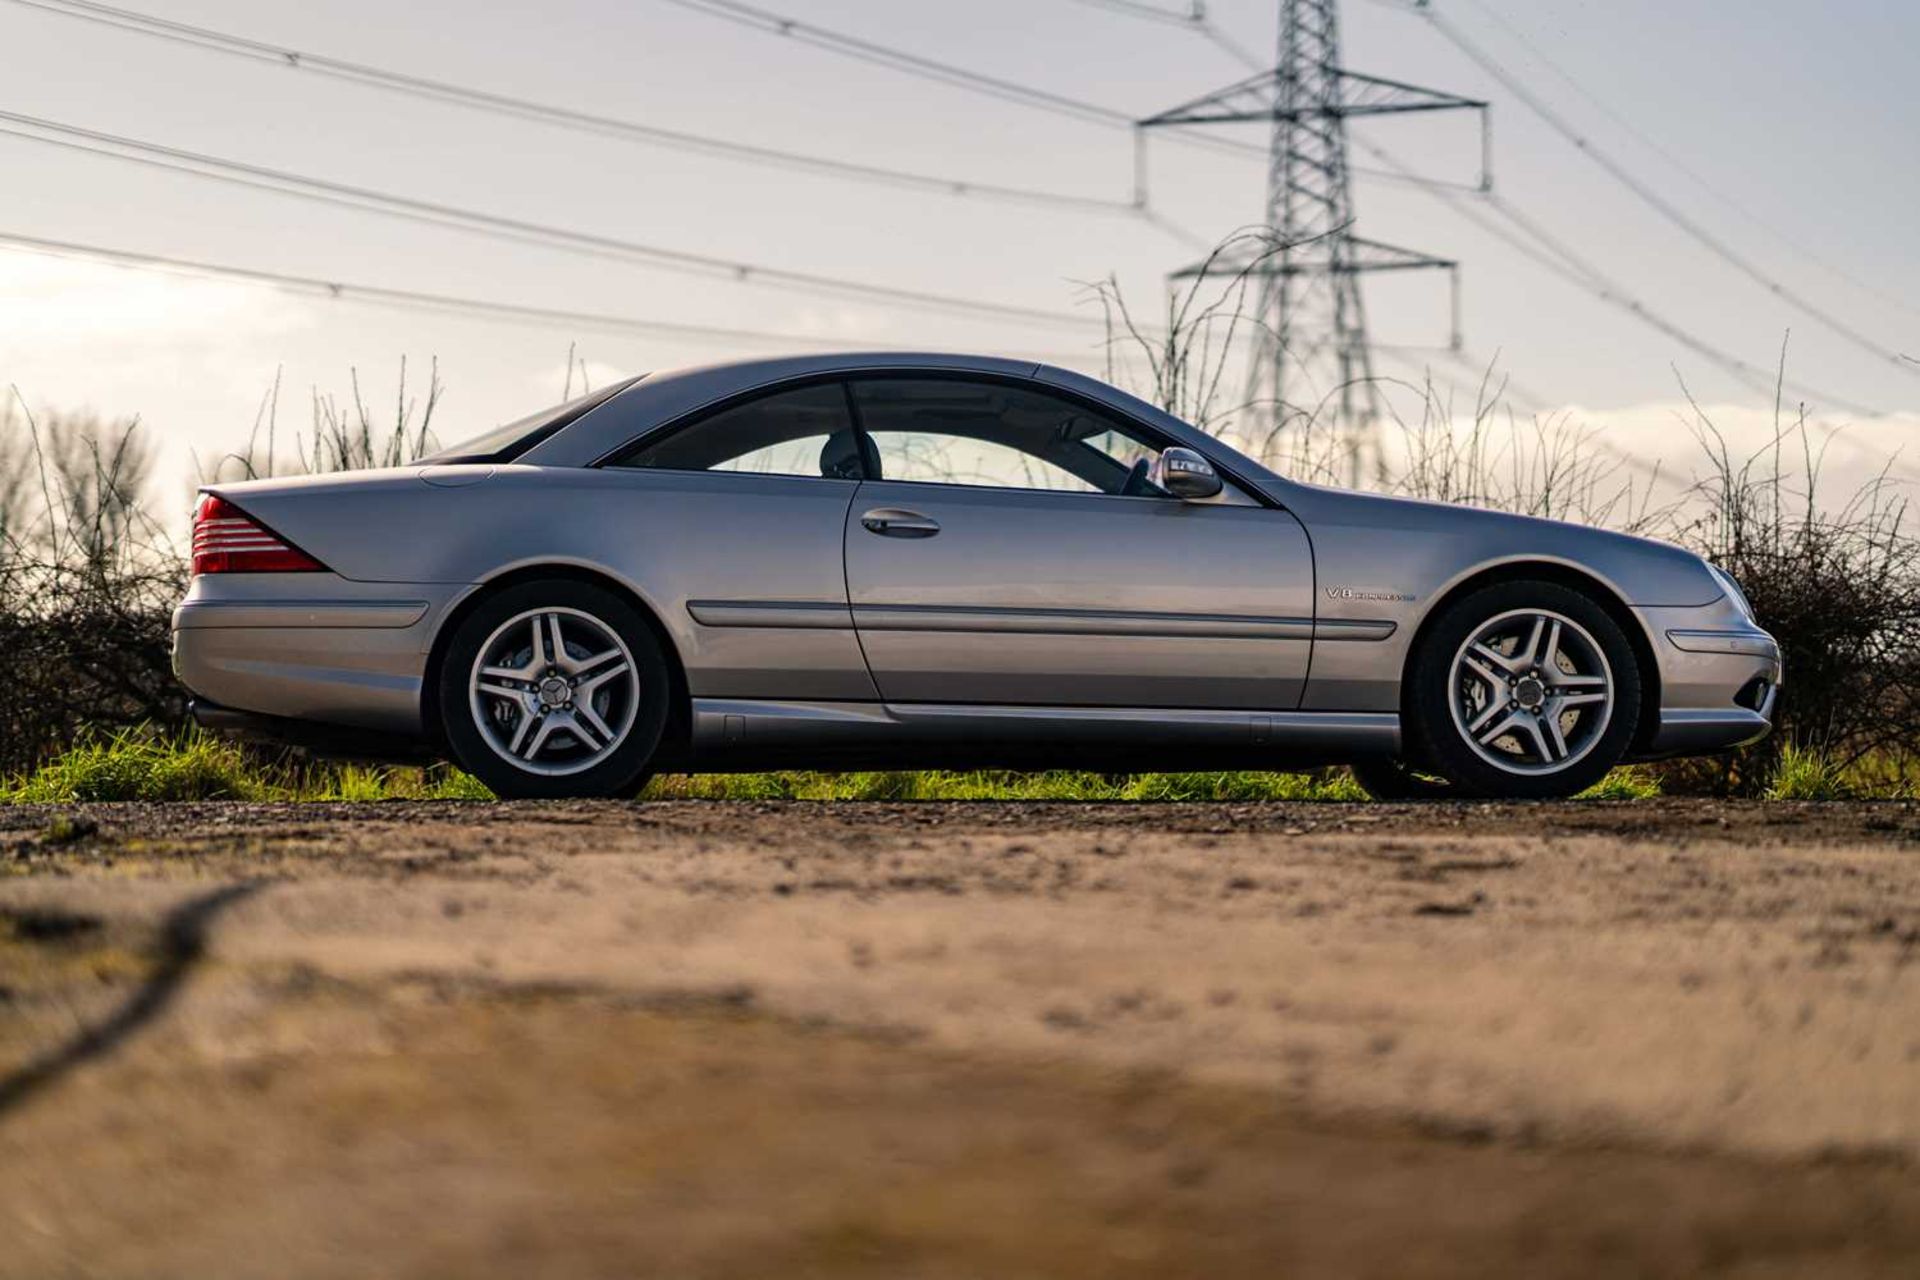 2004 Mercedes CL55 AMG - Image 12 of 52